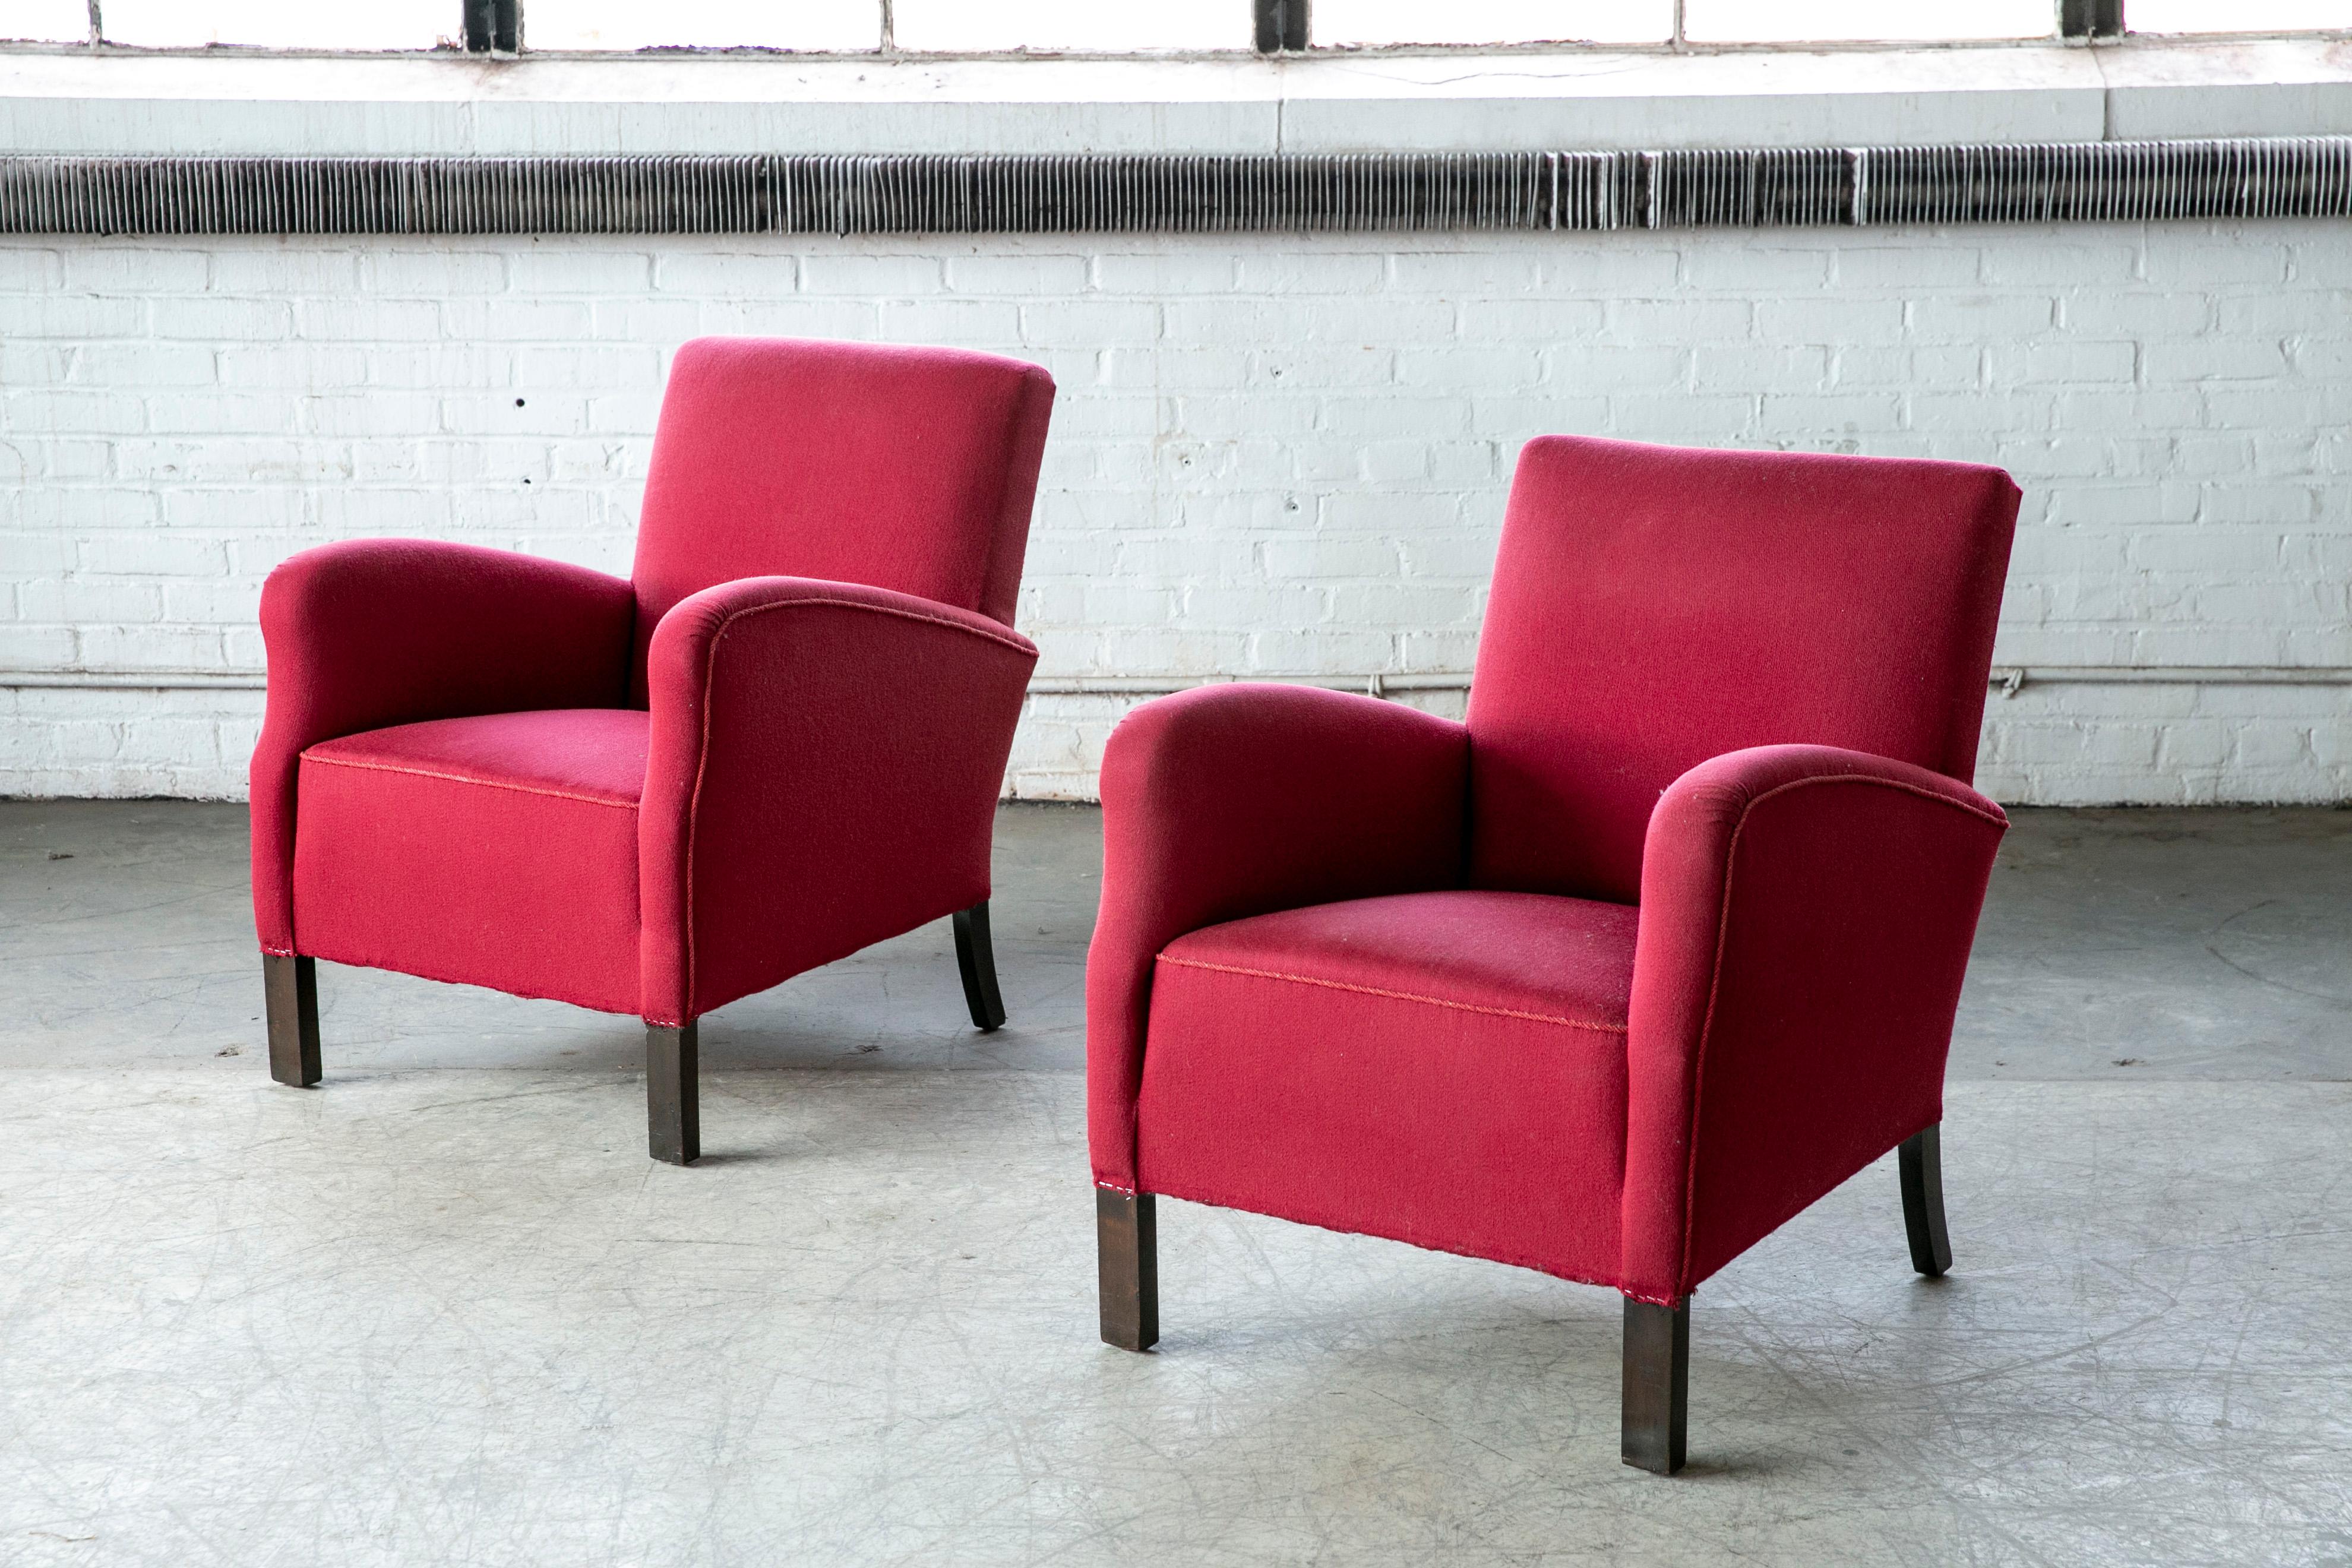 Beautiful pair of 1930-40s Danish easy chair attributed to Fritz Hansen. Very elegant with their distinct shape, precise lines and harmonious proportions. Very versatile size well suited for today's urban homes. The chairs have been reupholstered at